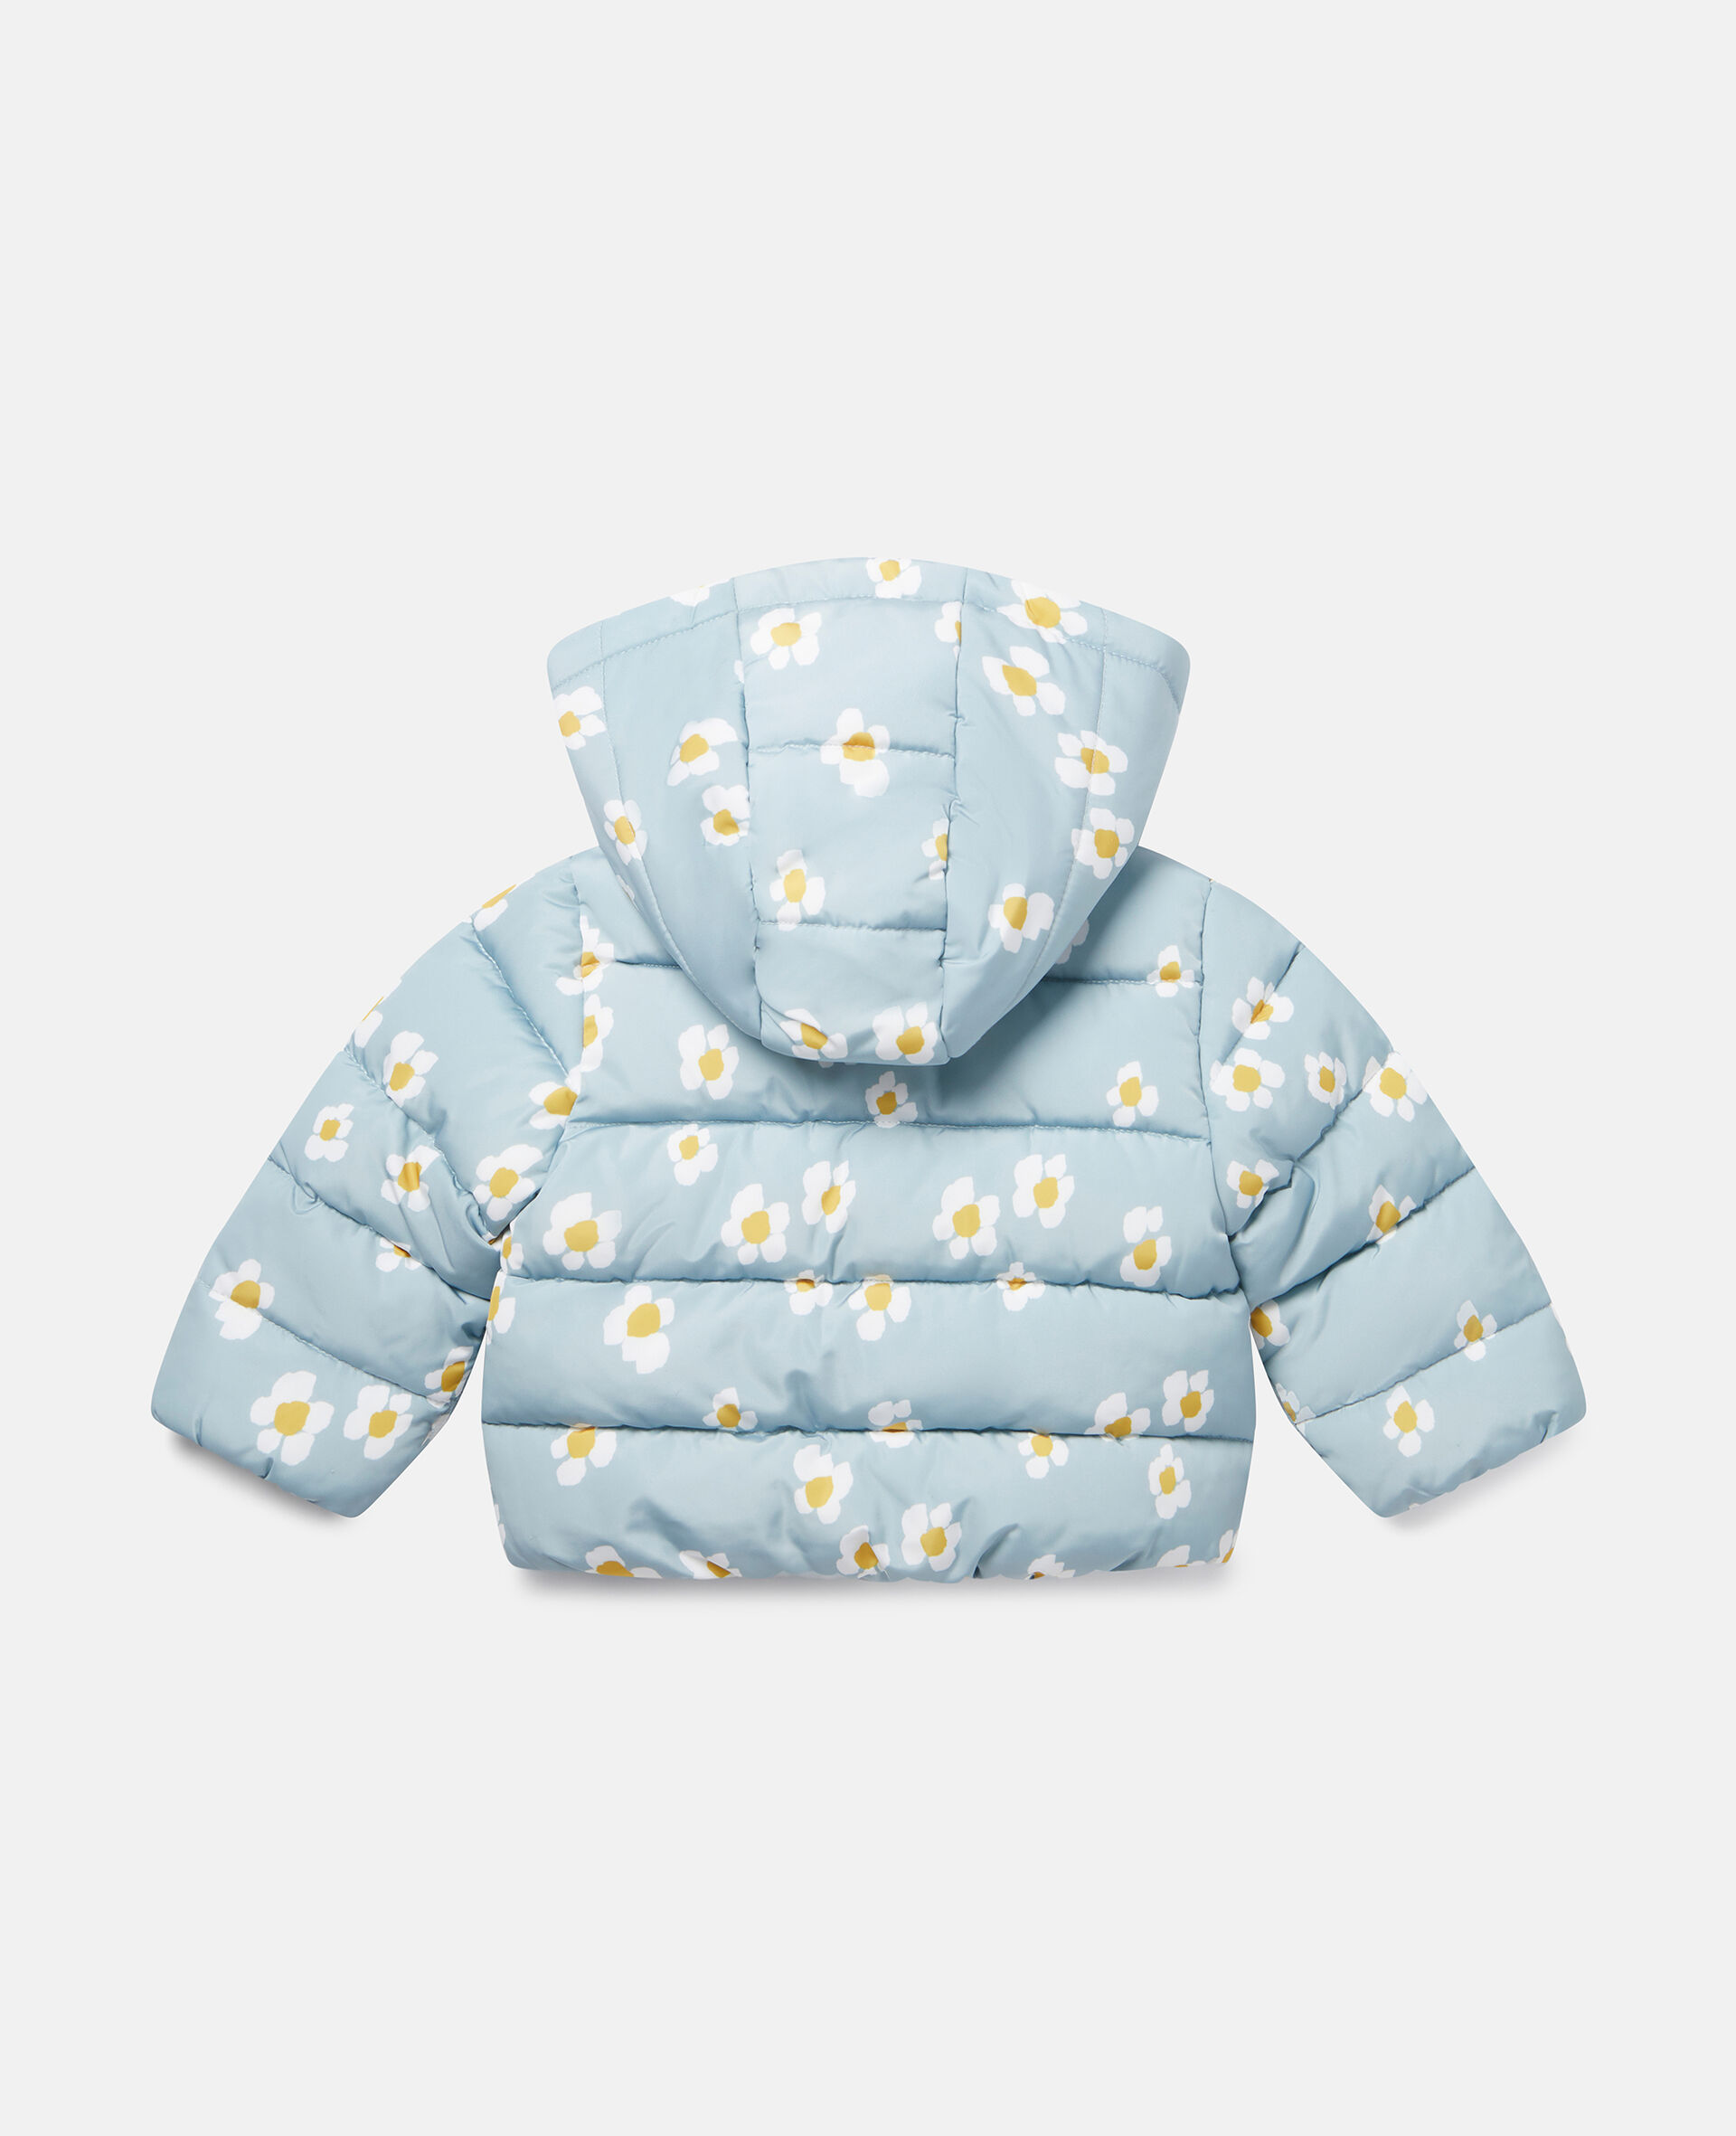 Daisy Print Puffer Jacket-Blue-large image number 2